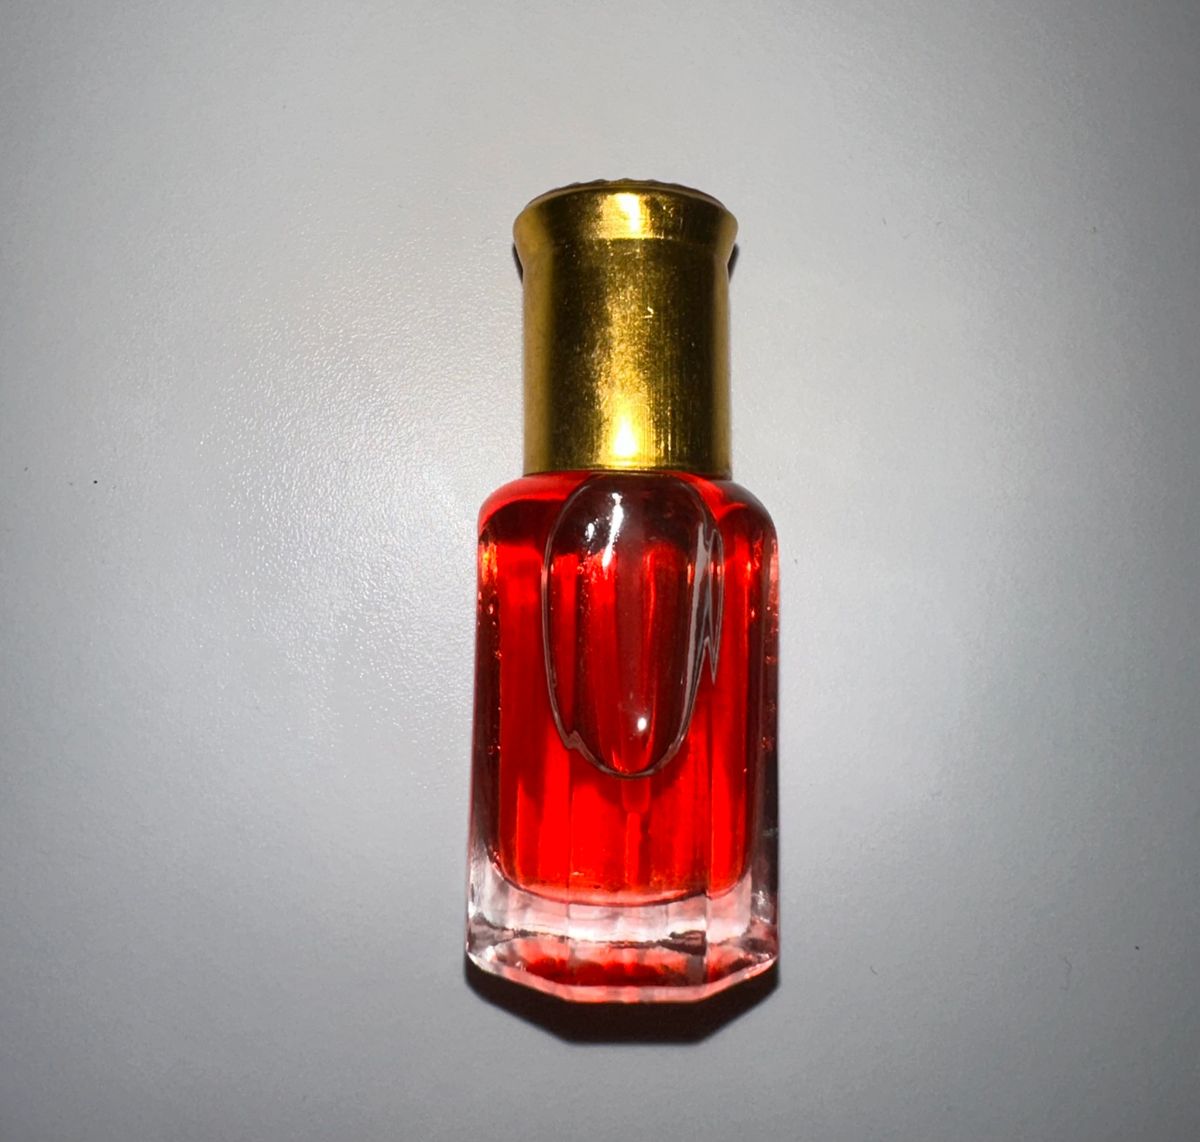 Ombre Nomade X Lost Cherry blend. An amazing perfume oil blend